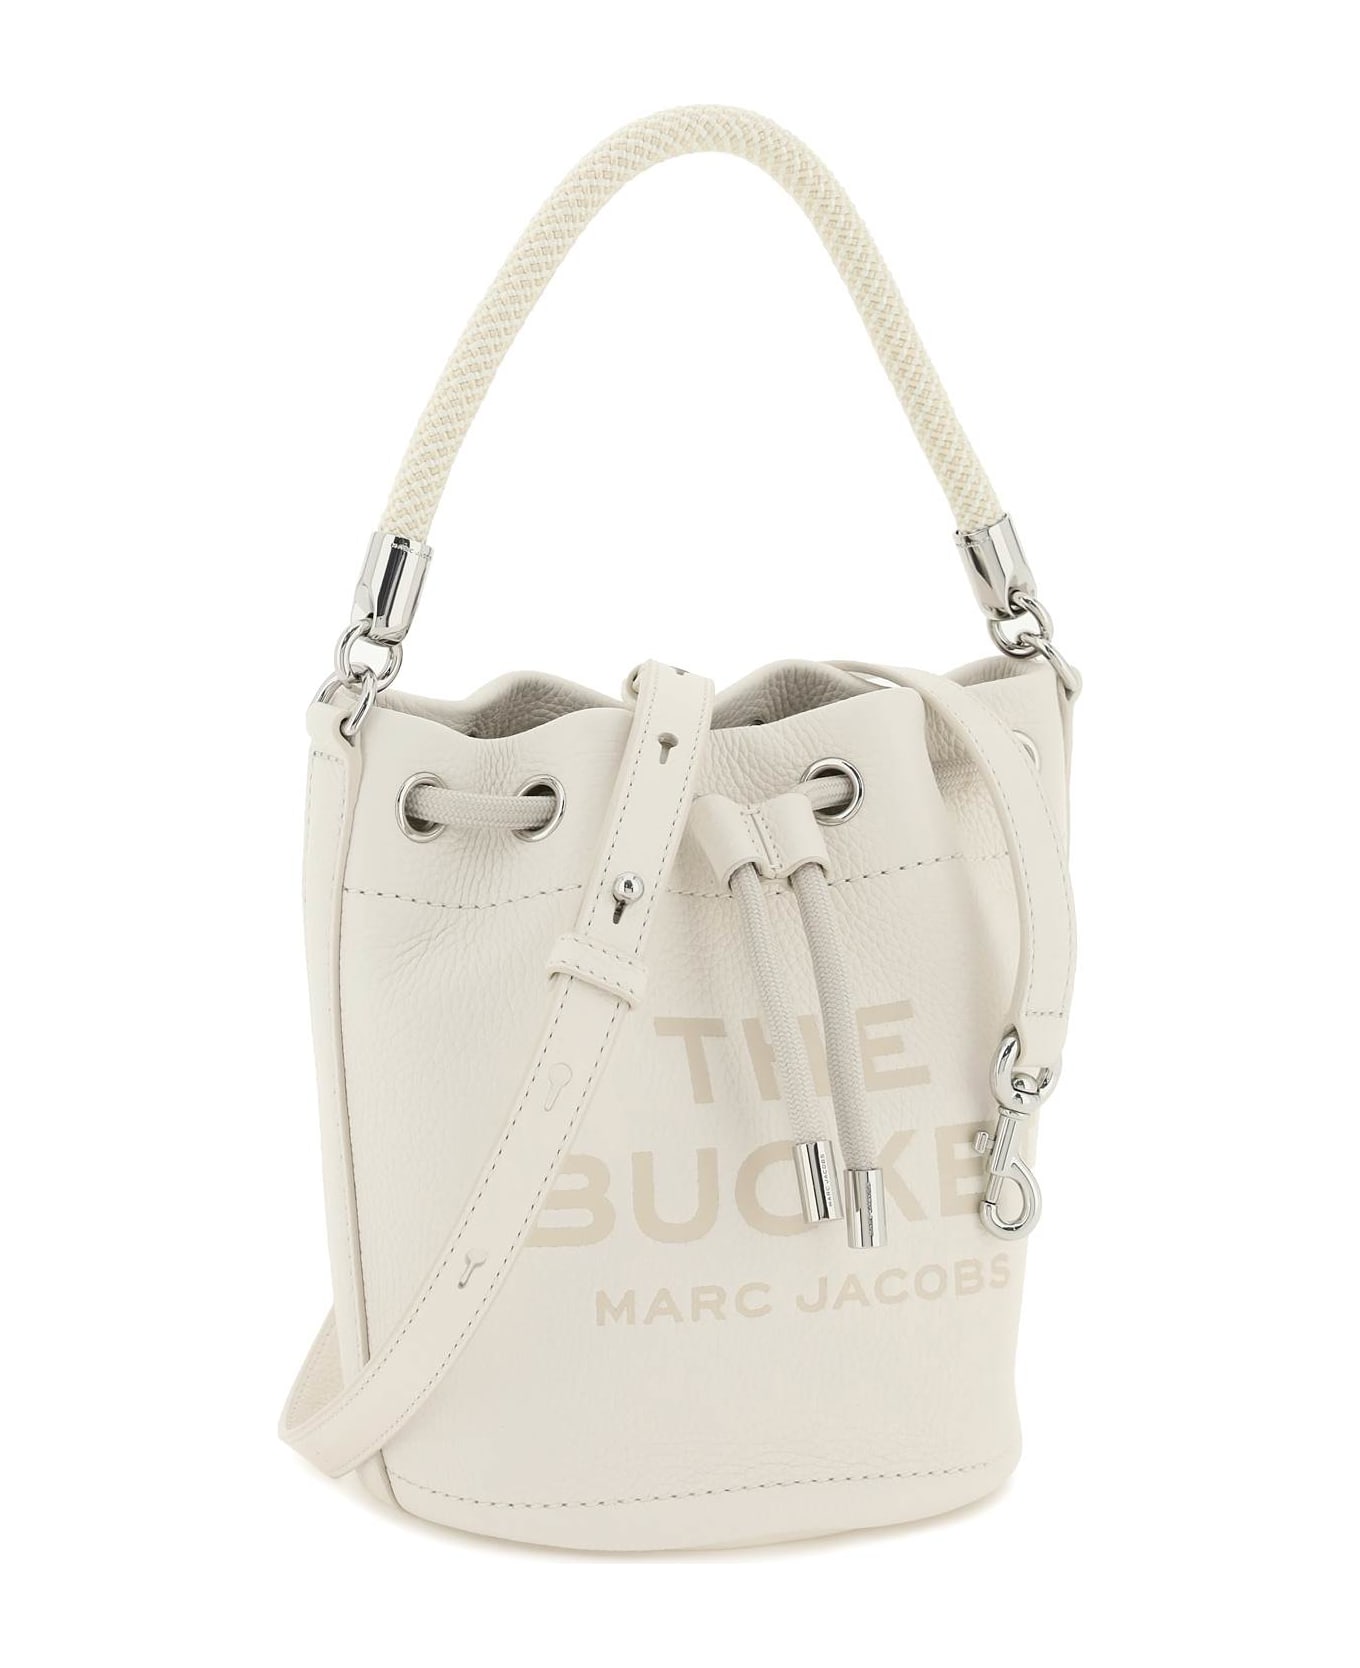 Marc Jacobs The Leather Bucket Bag - Silver トートバッグ